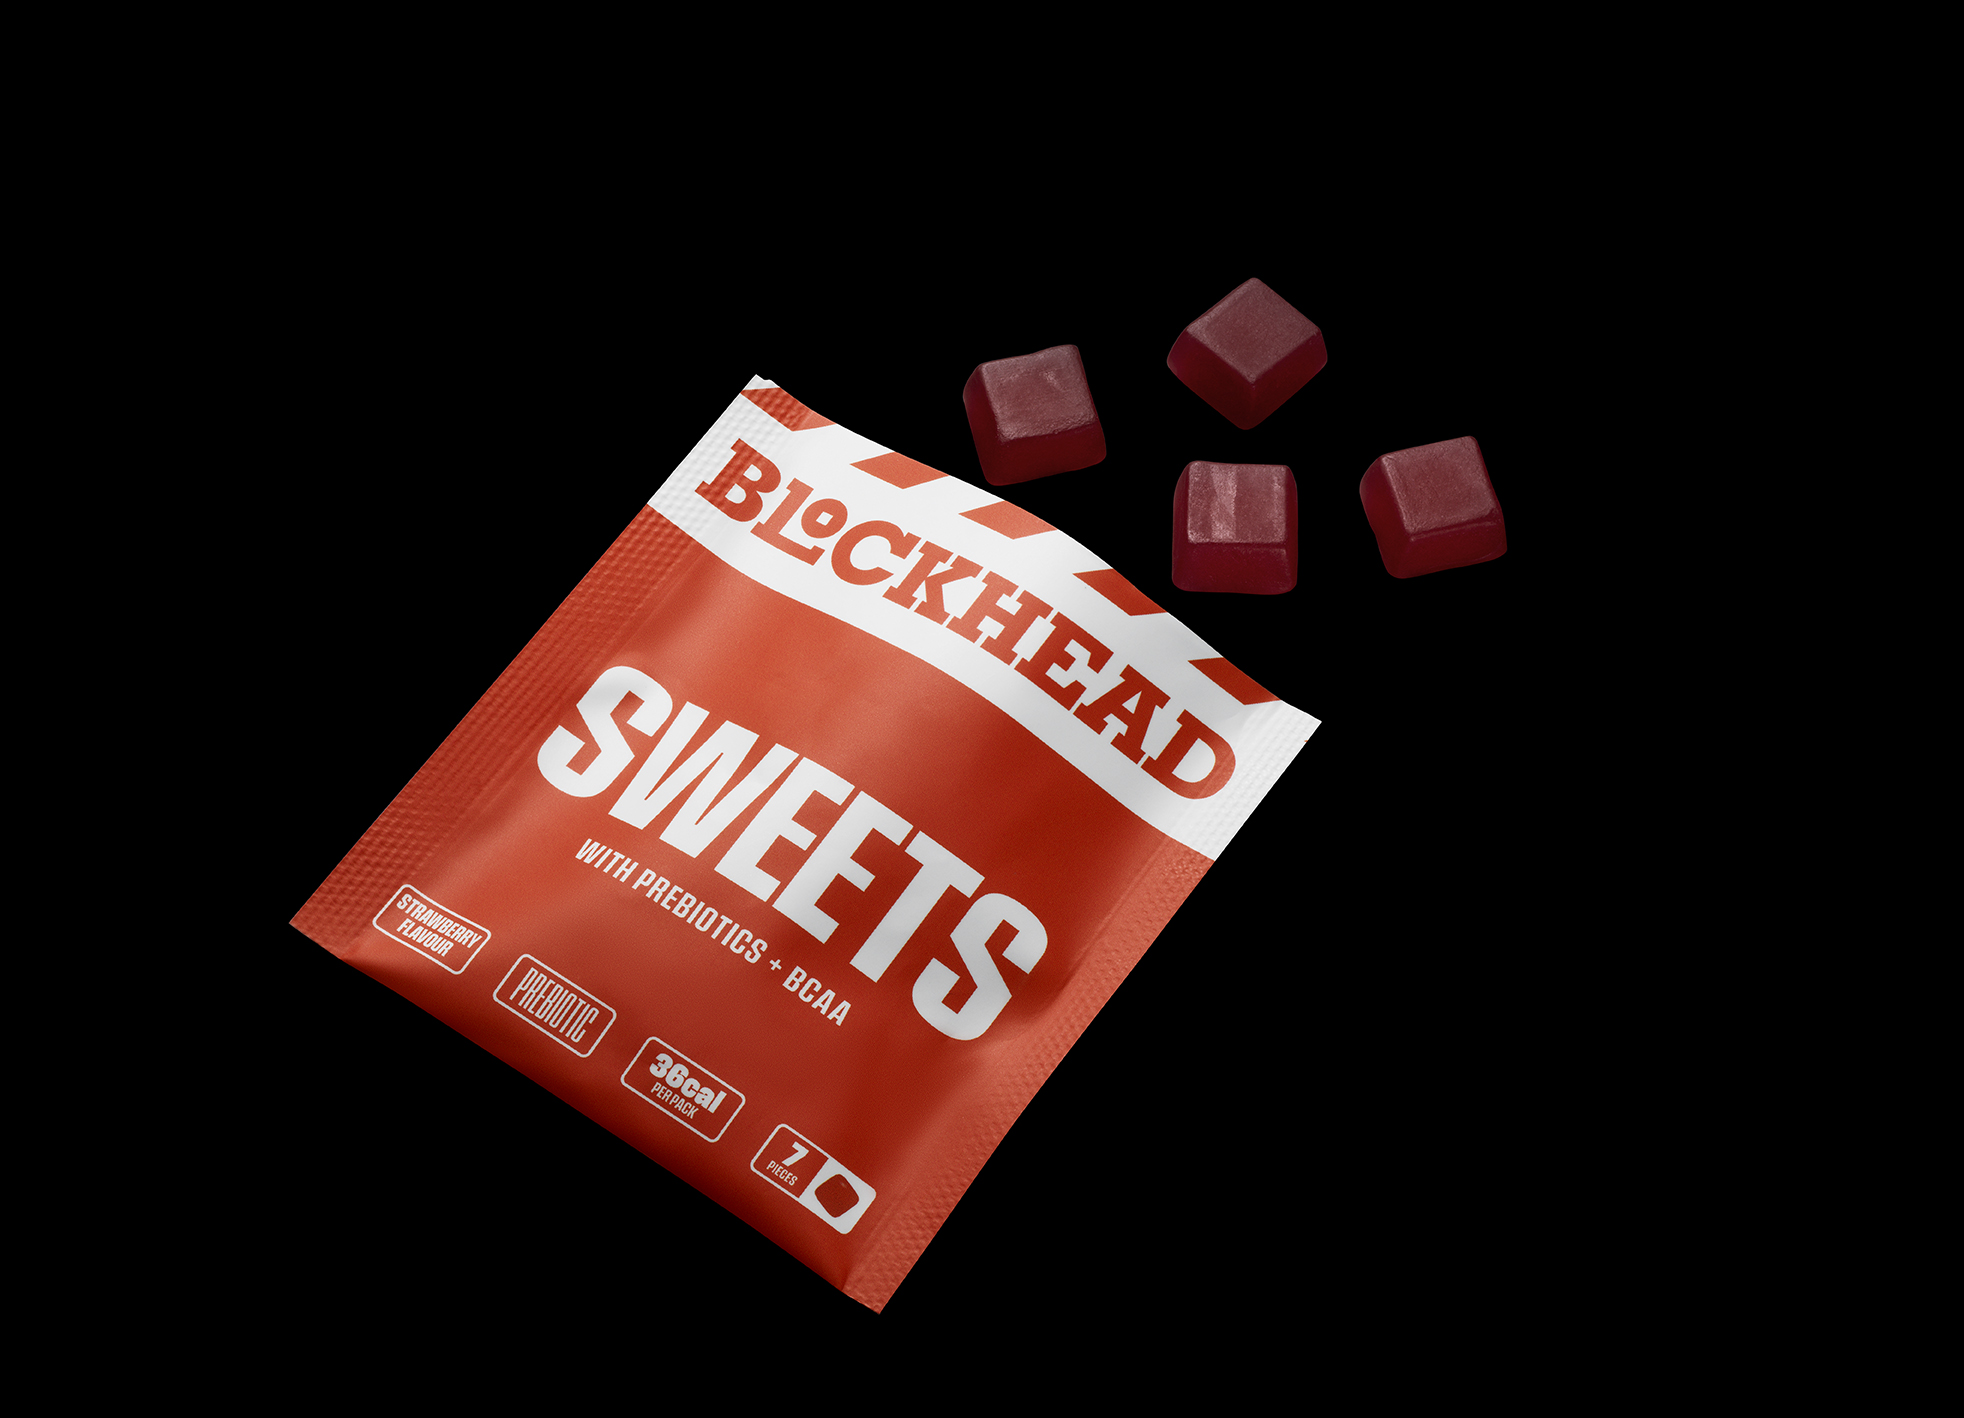 Blockhead ‘functional sweets’ launches prebiotic strawberry NPD